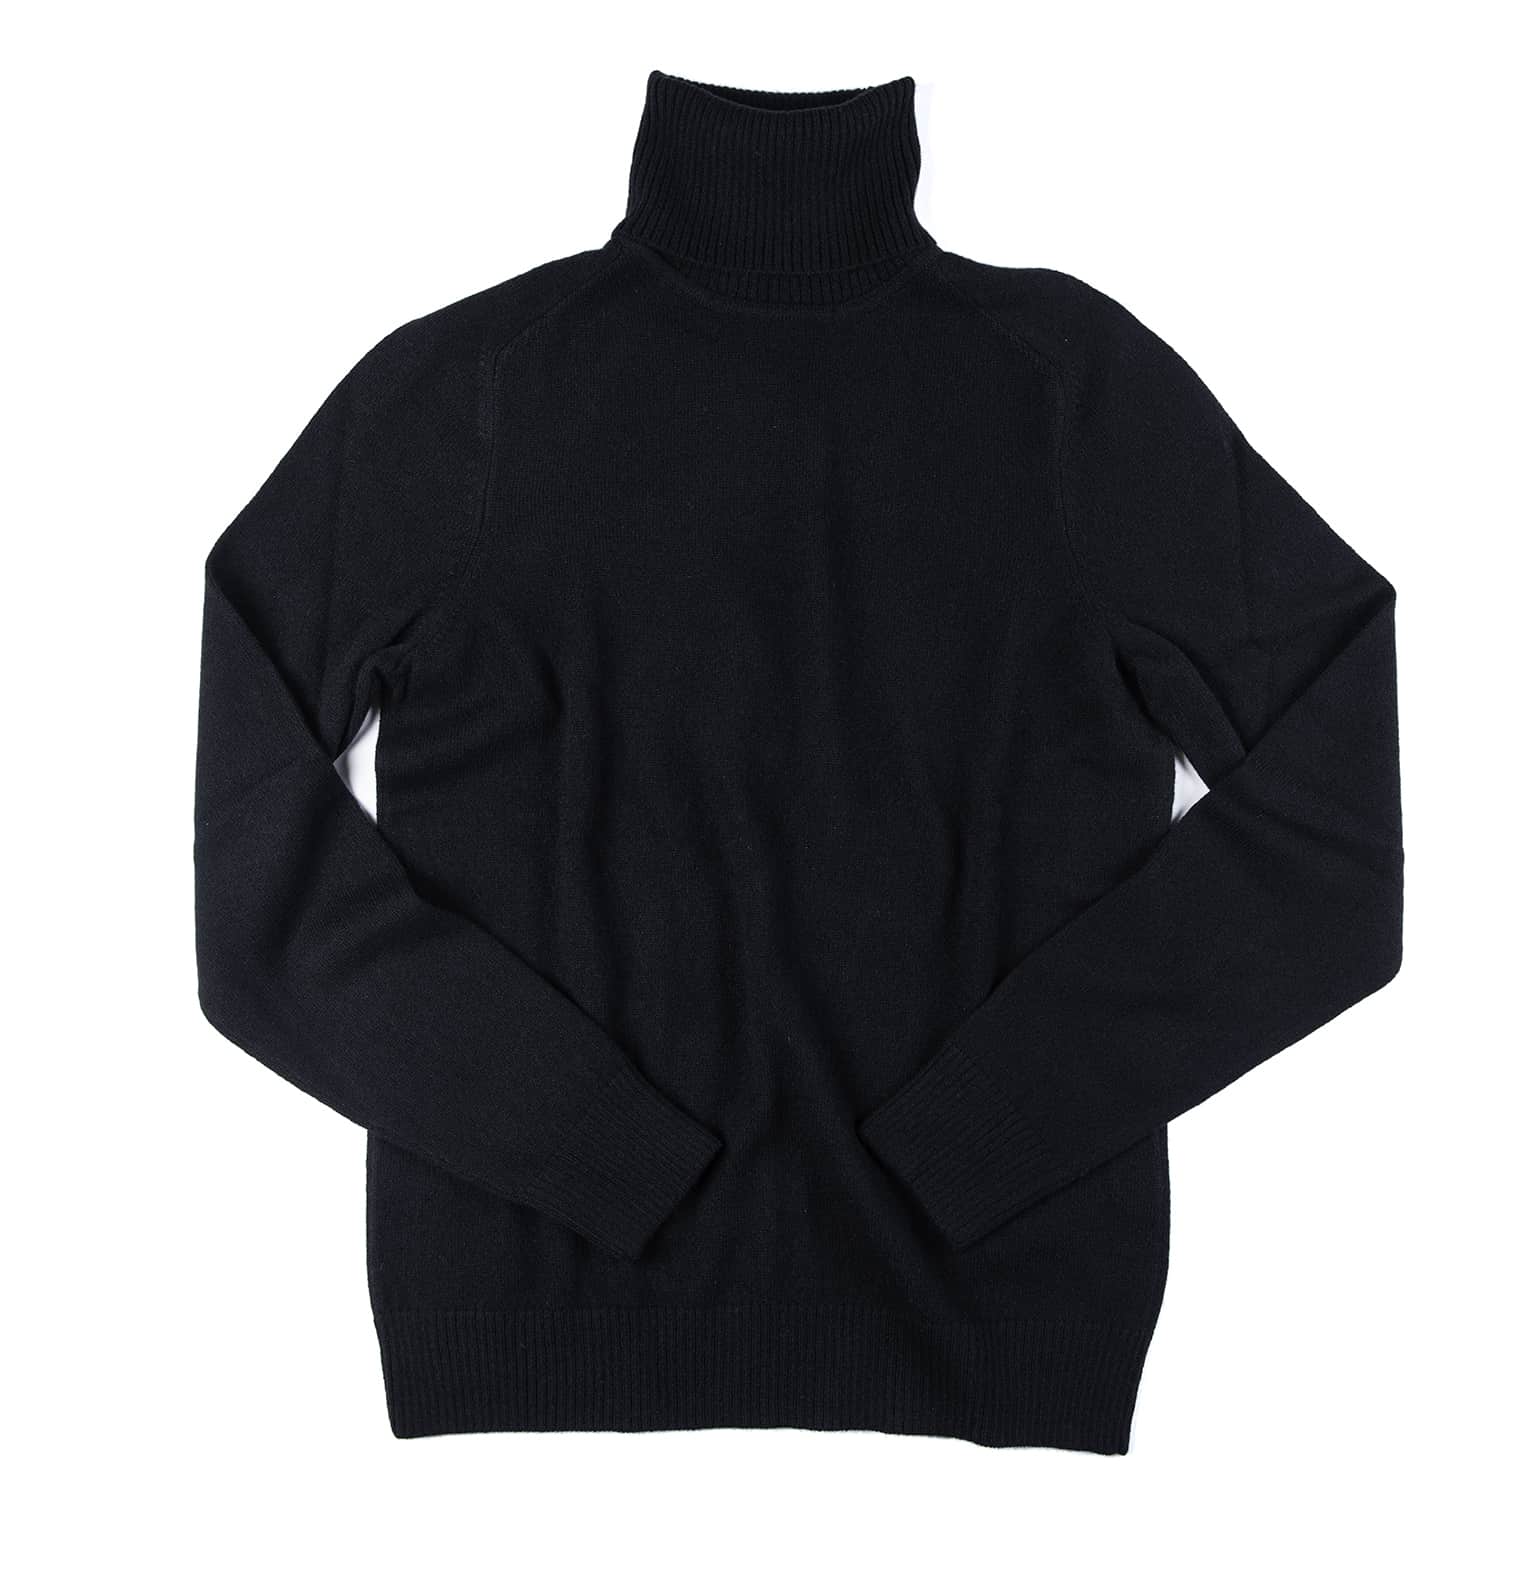 The Women's Turtleneck – Golightly Cashmere